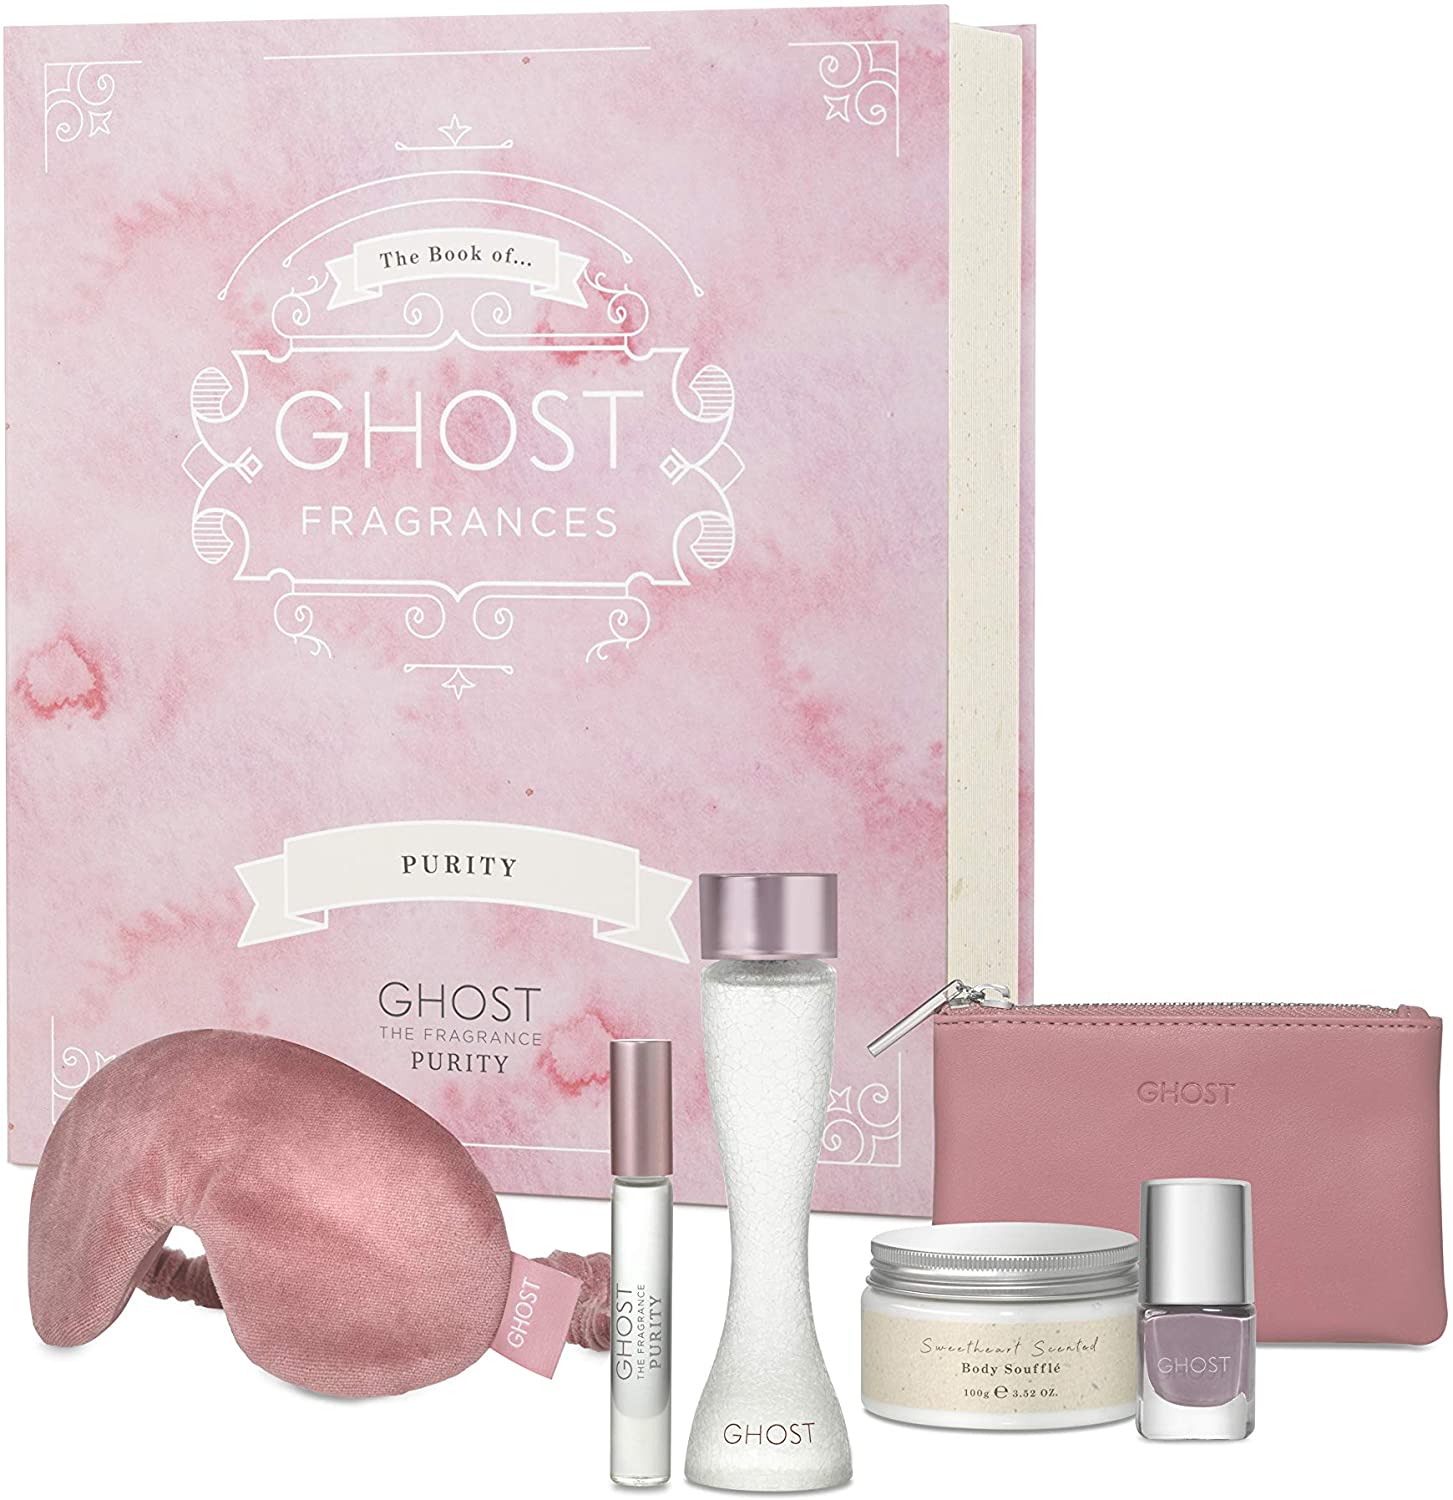 Ghost The Fragrance Purity 50ml Gift set